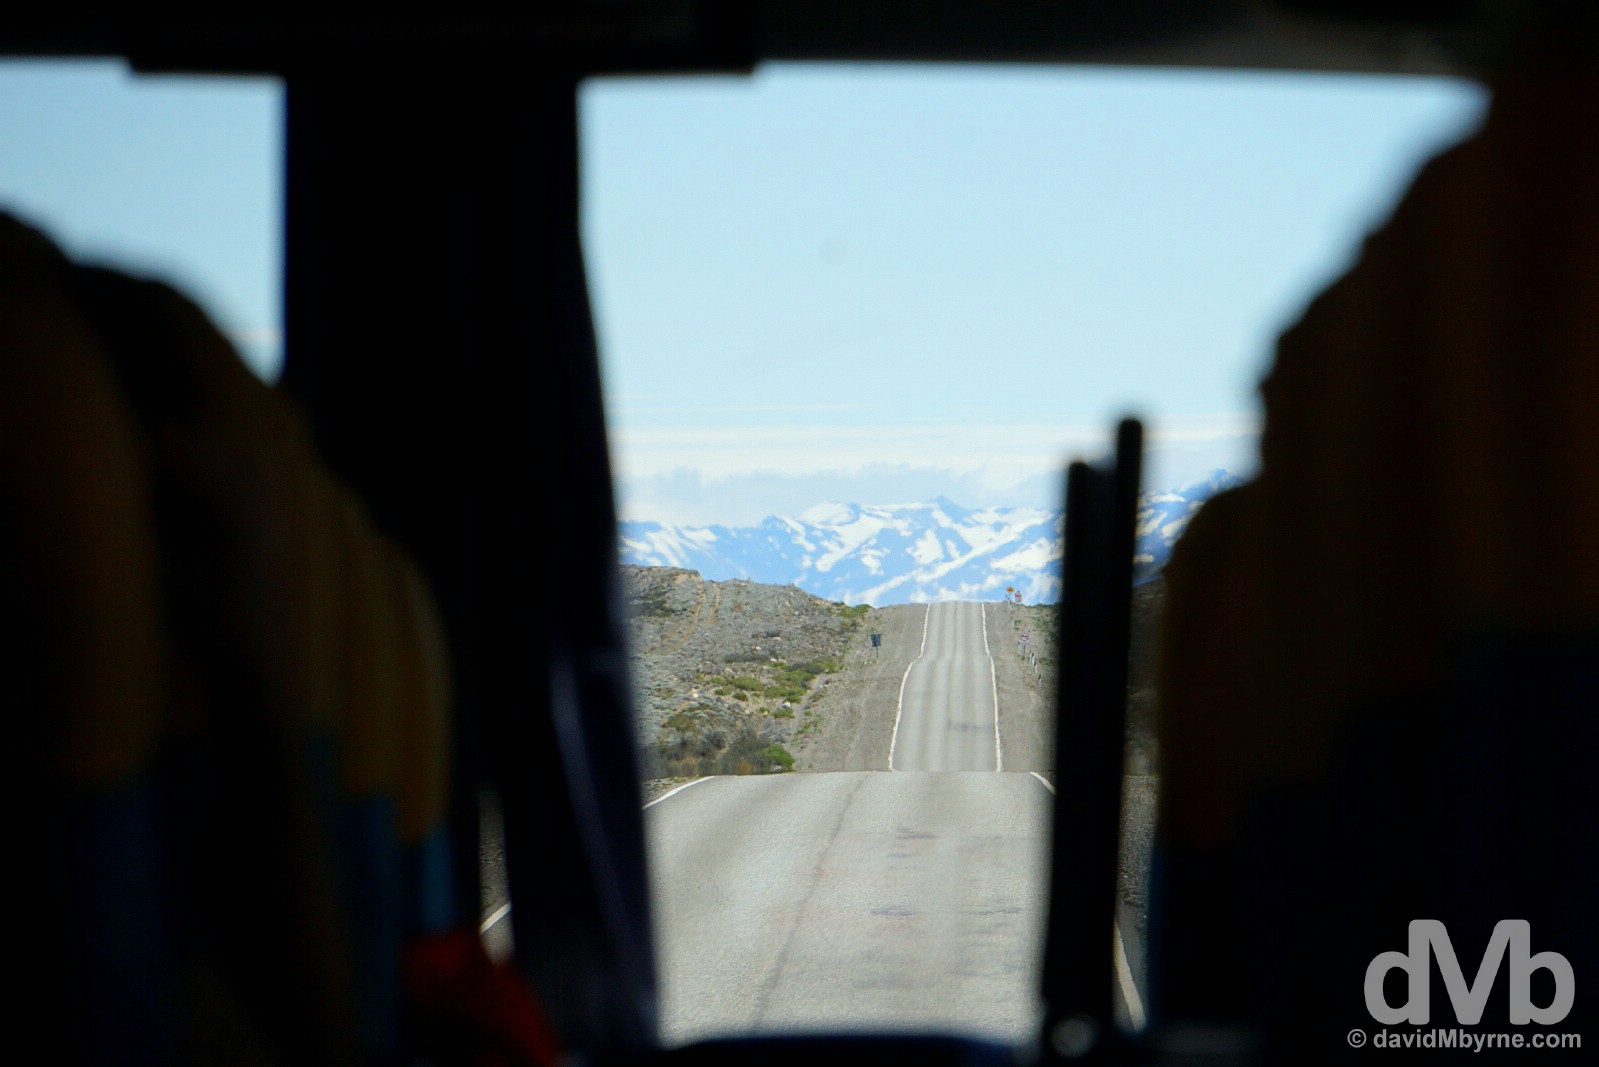 Back row bus view heading west on Ruta 5, Patagonia, Argentina. November 1, 2015.